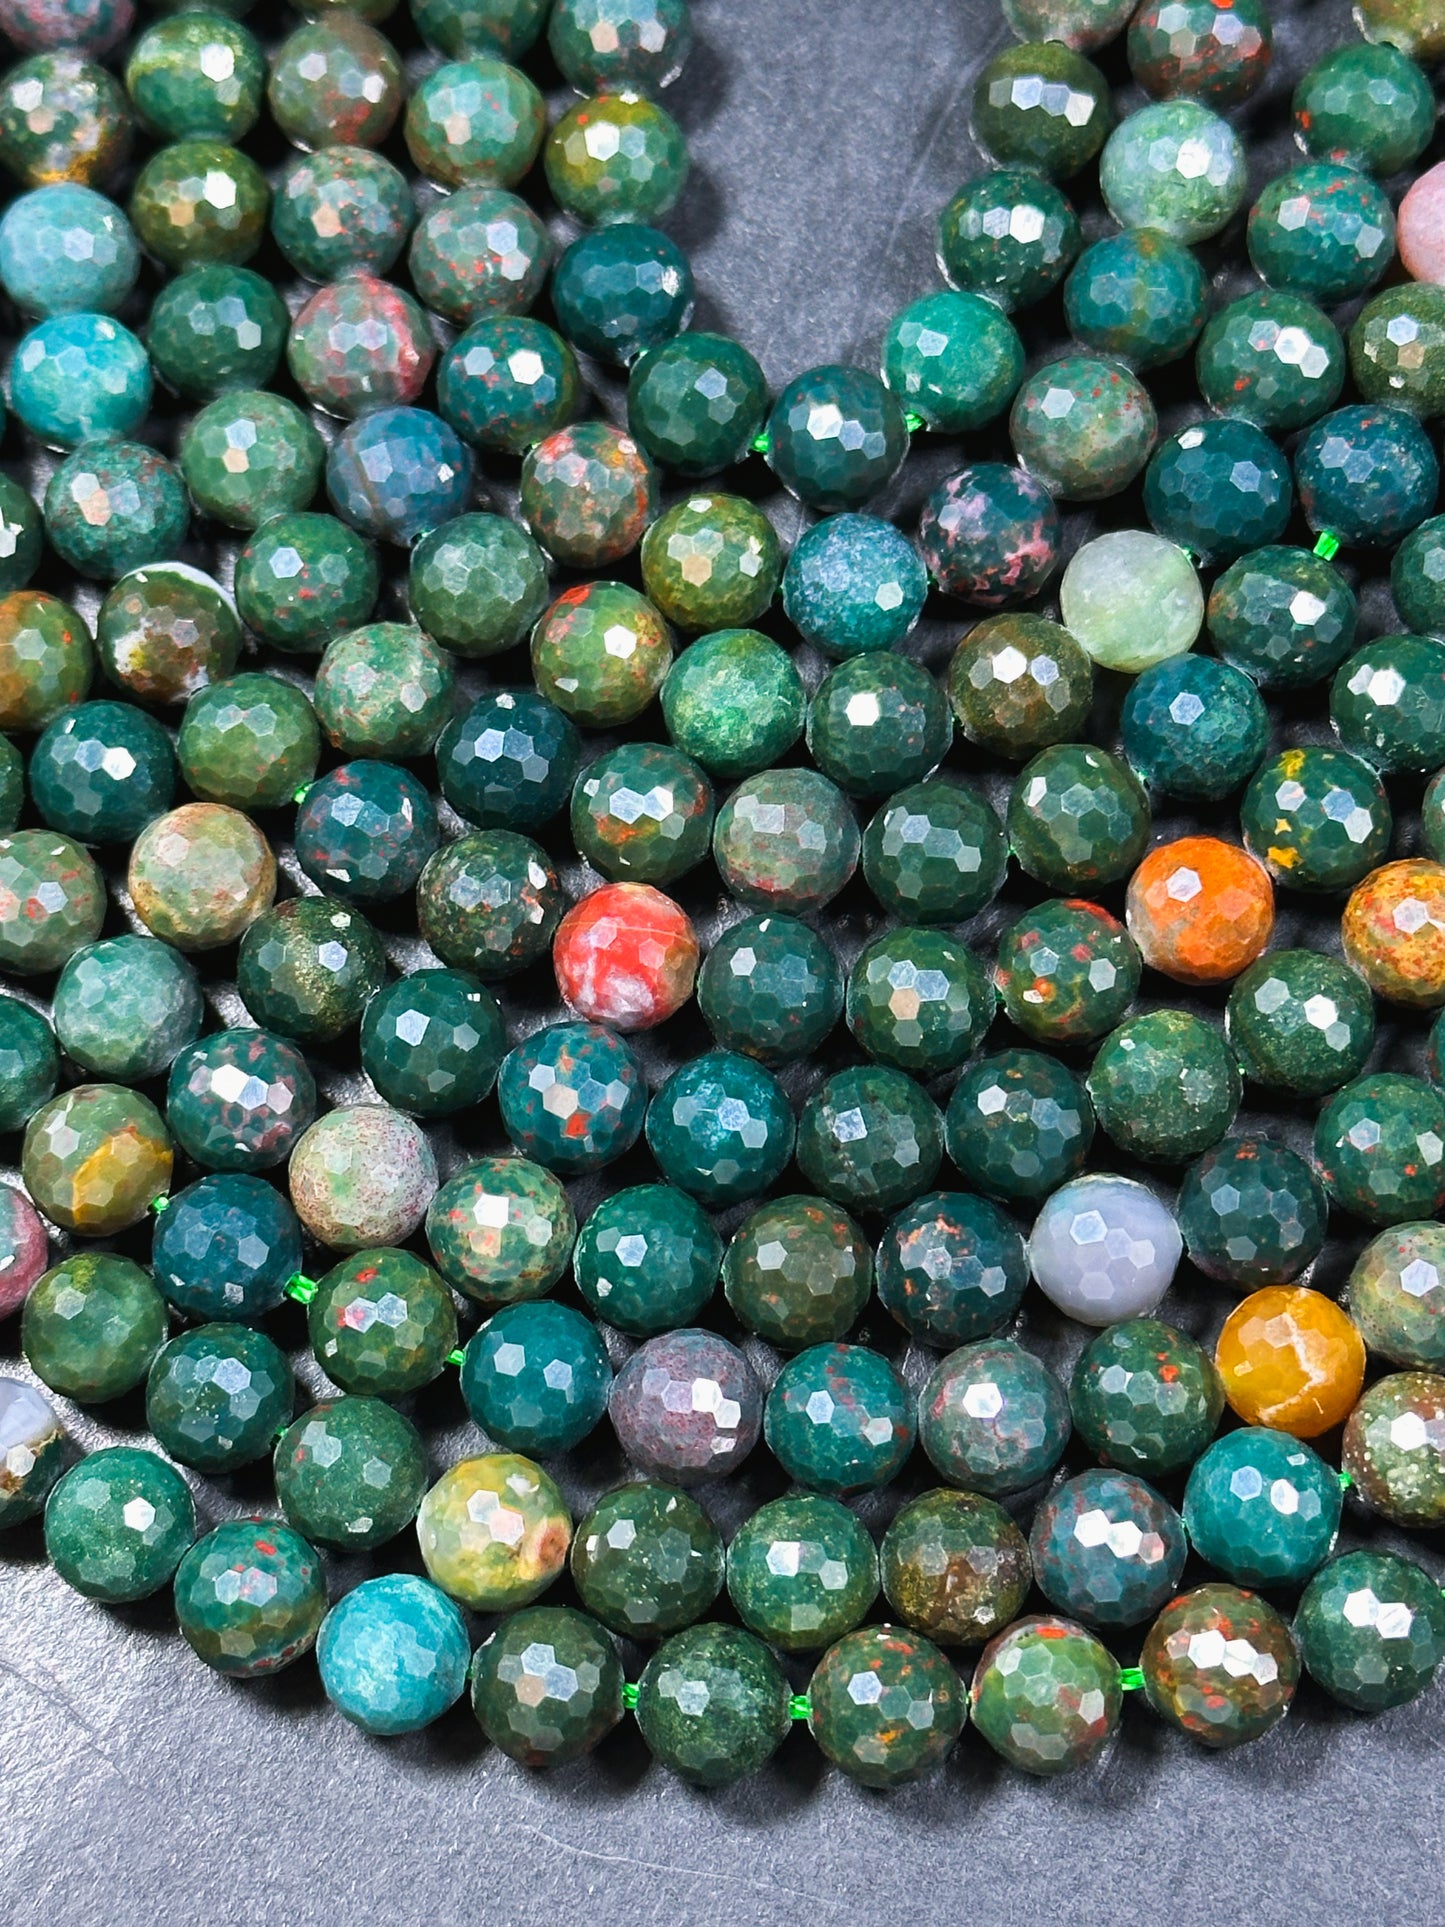 NATURAL Bloodstone Gemstone Bead Faceted 6mm 8mm 10mm 12mm Round Bead, Beautiful Natural Green Color Bloodstone Gemstone Bead 15.5"